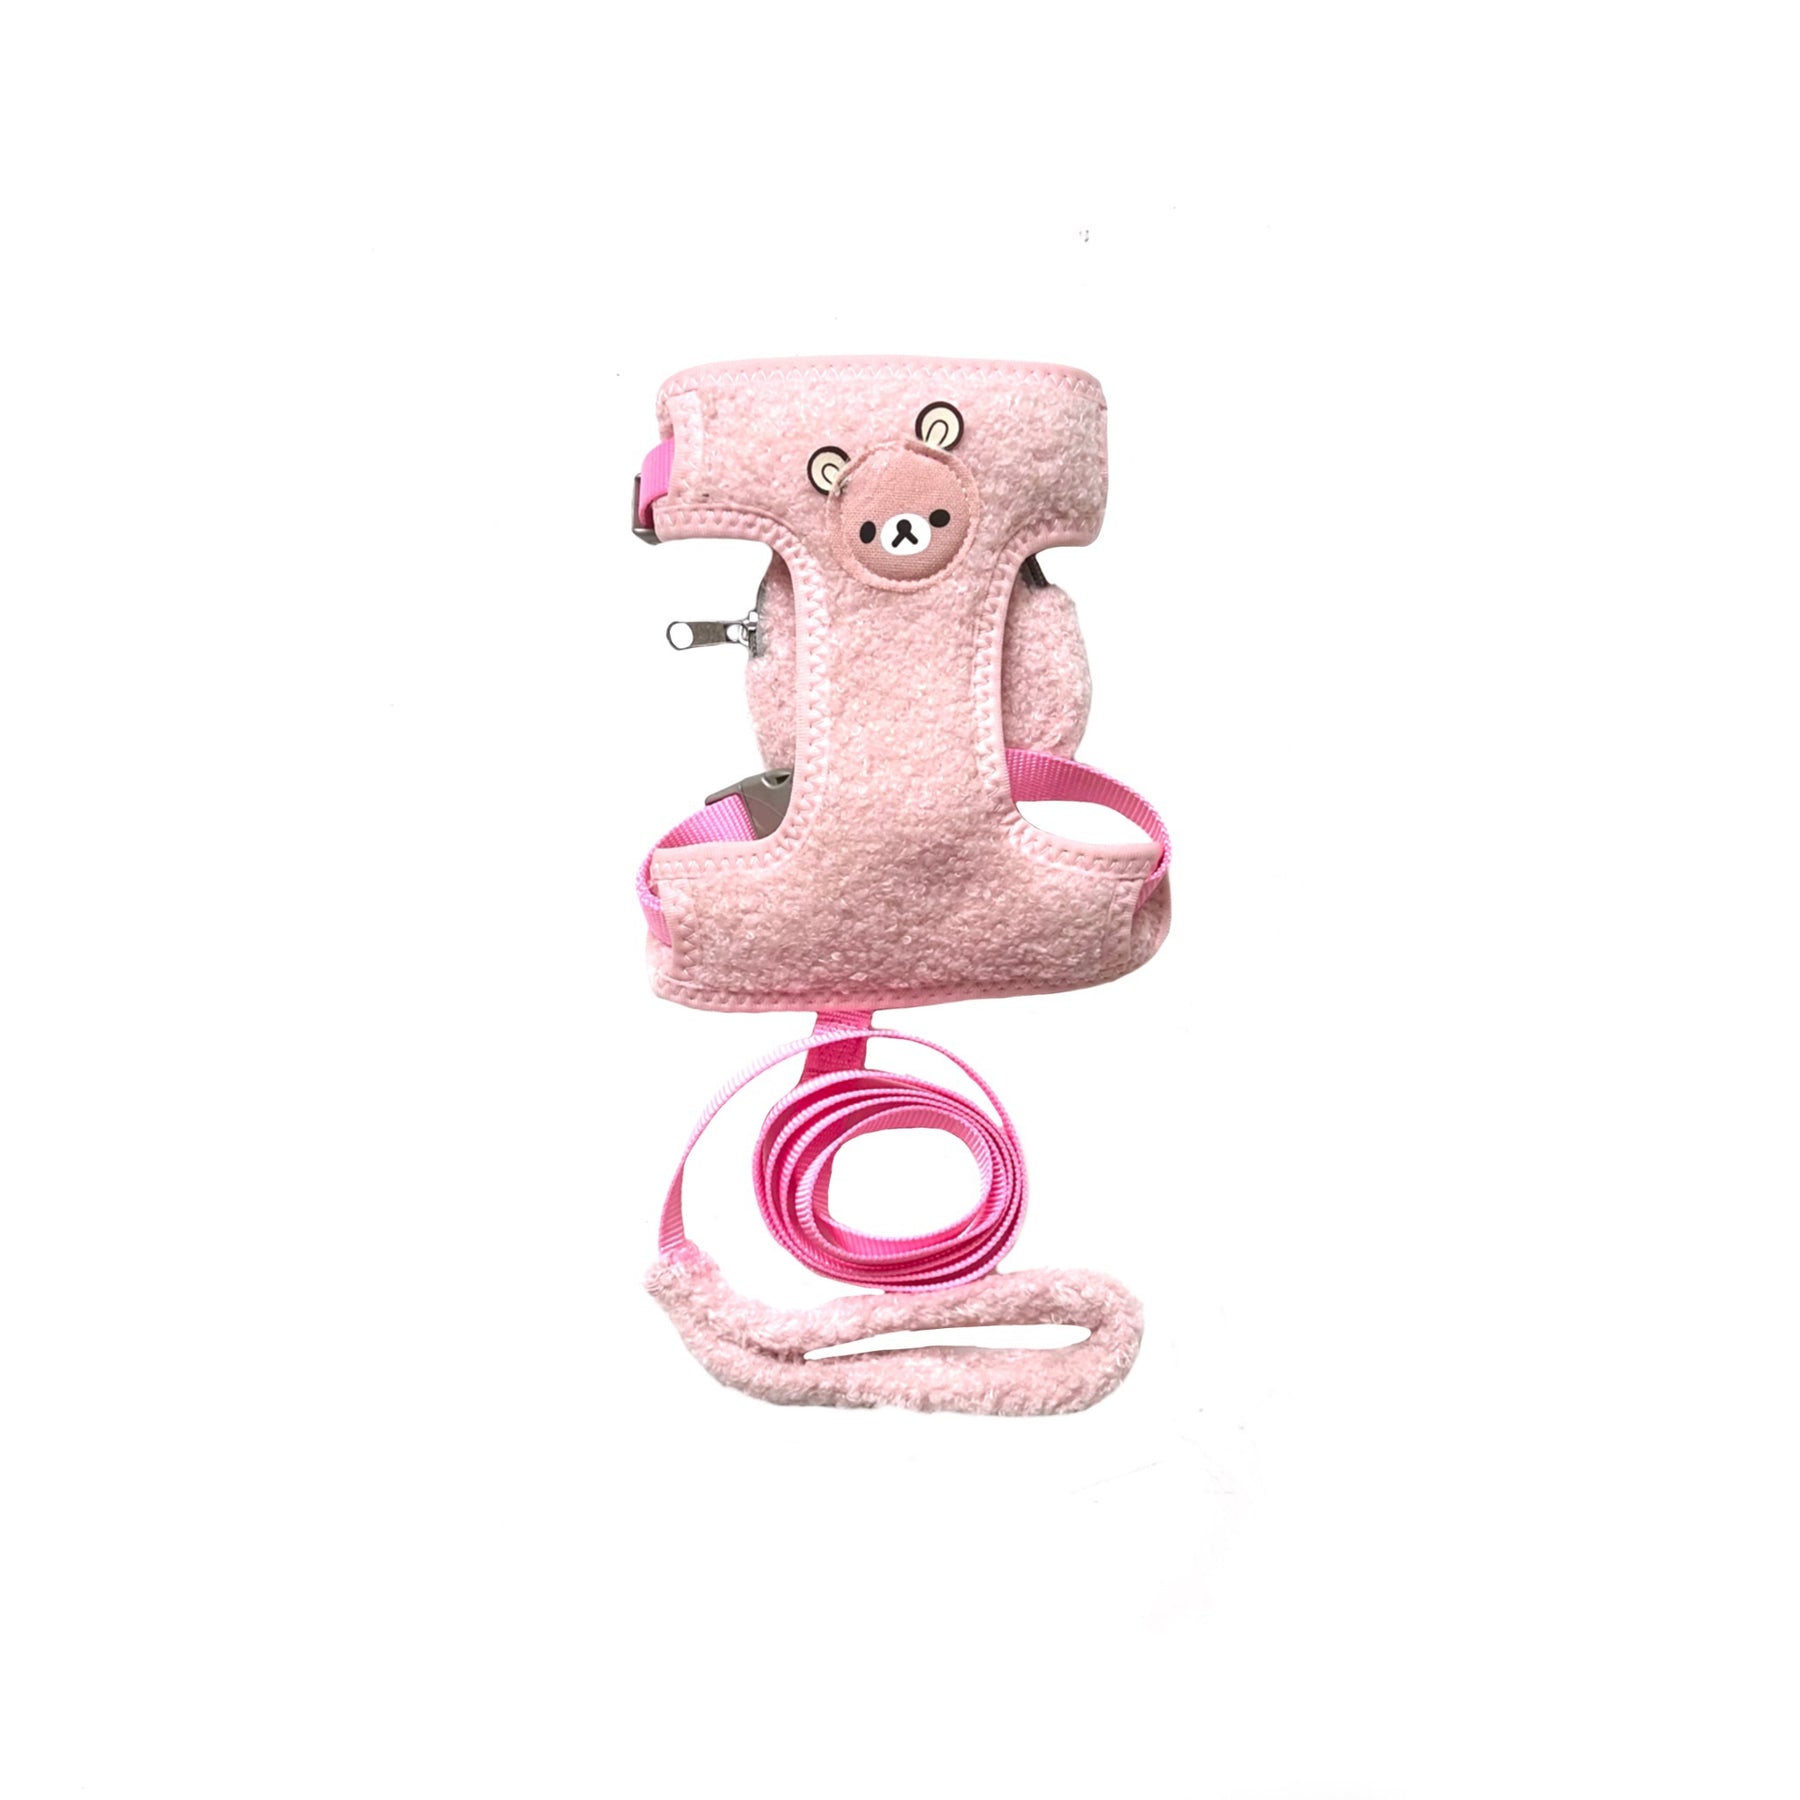 PINK FURRY TEDDY HARNESS AND LEASH